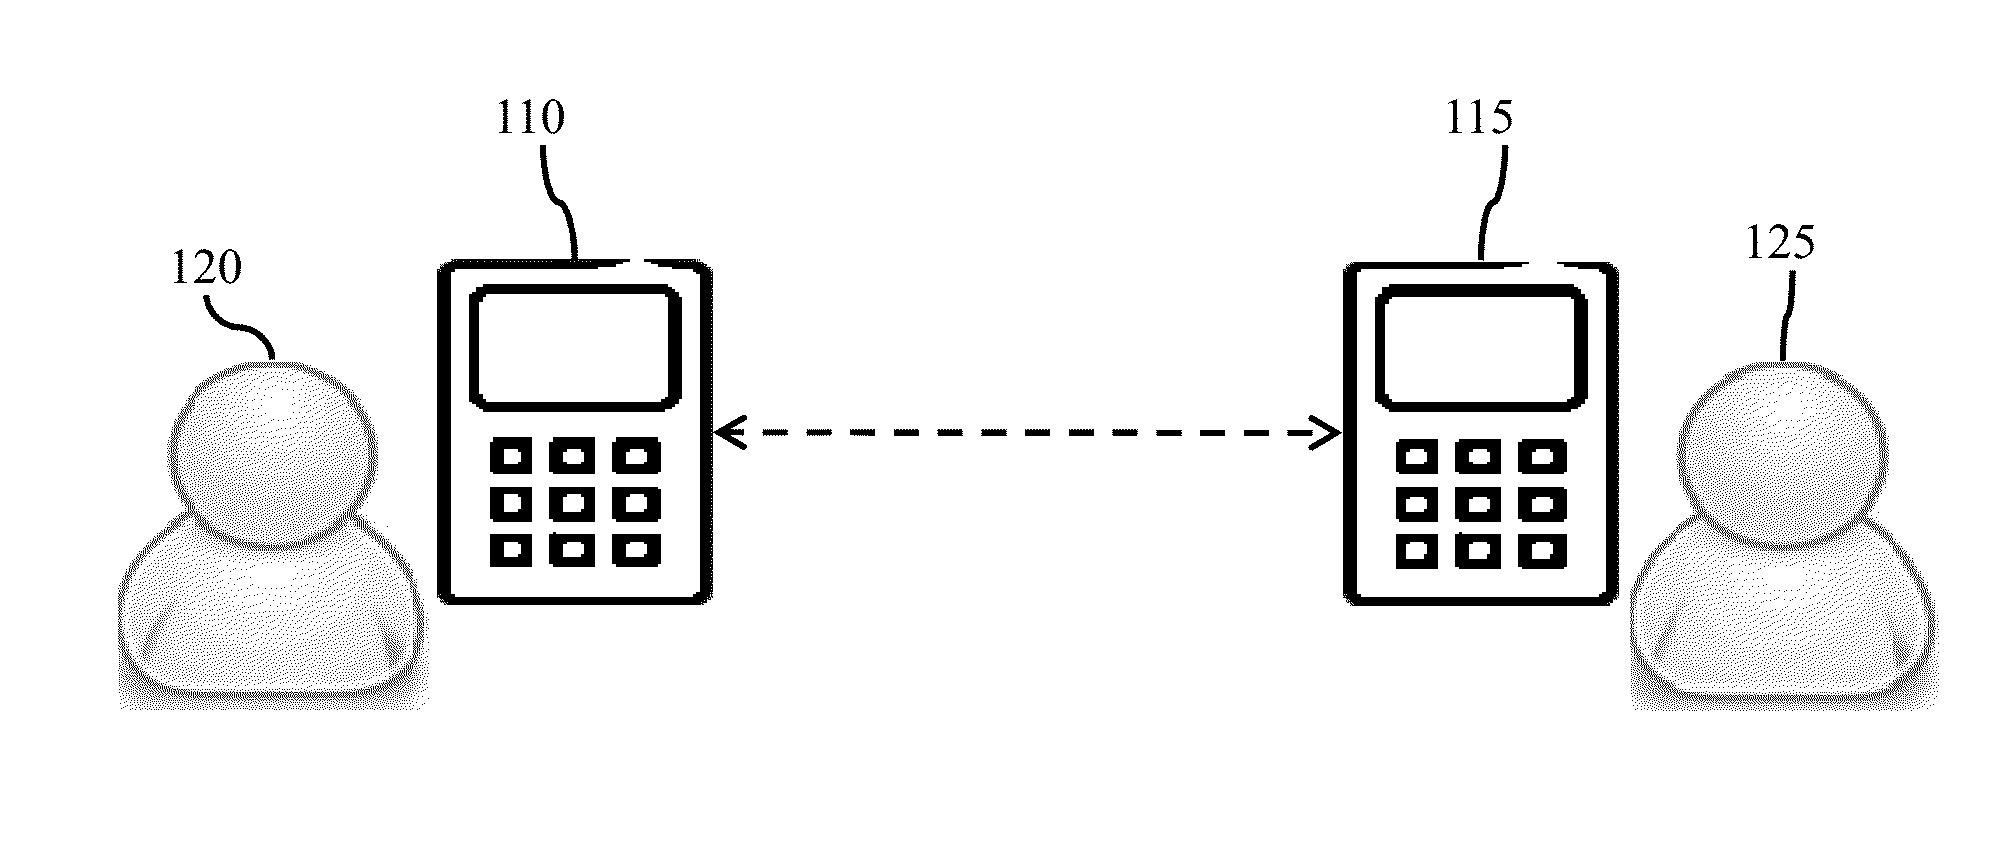 Data transfer using mobile devices